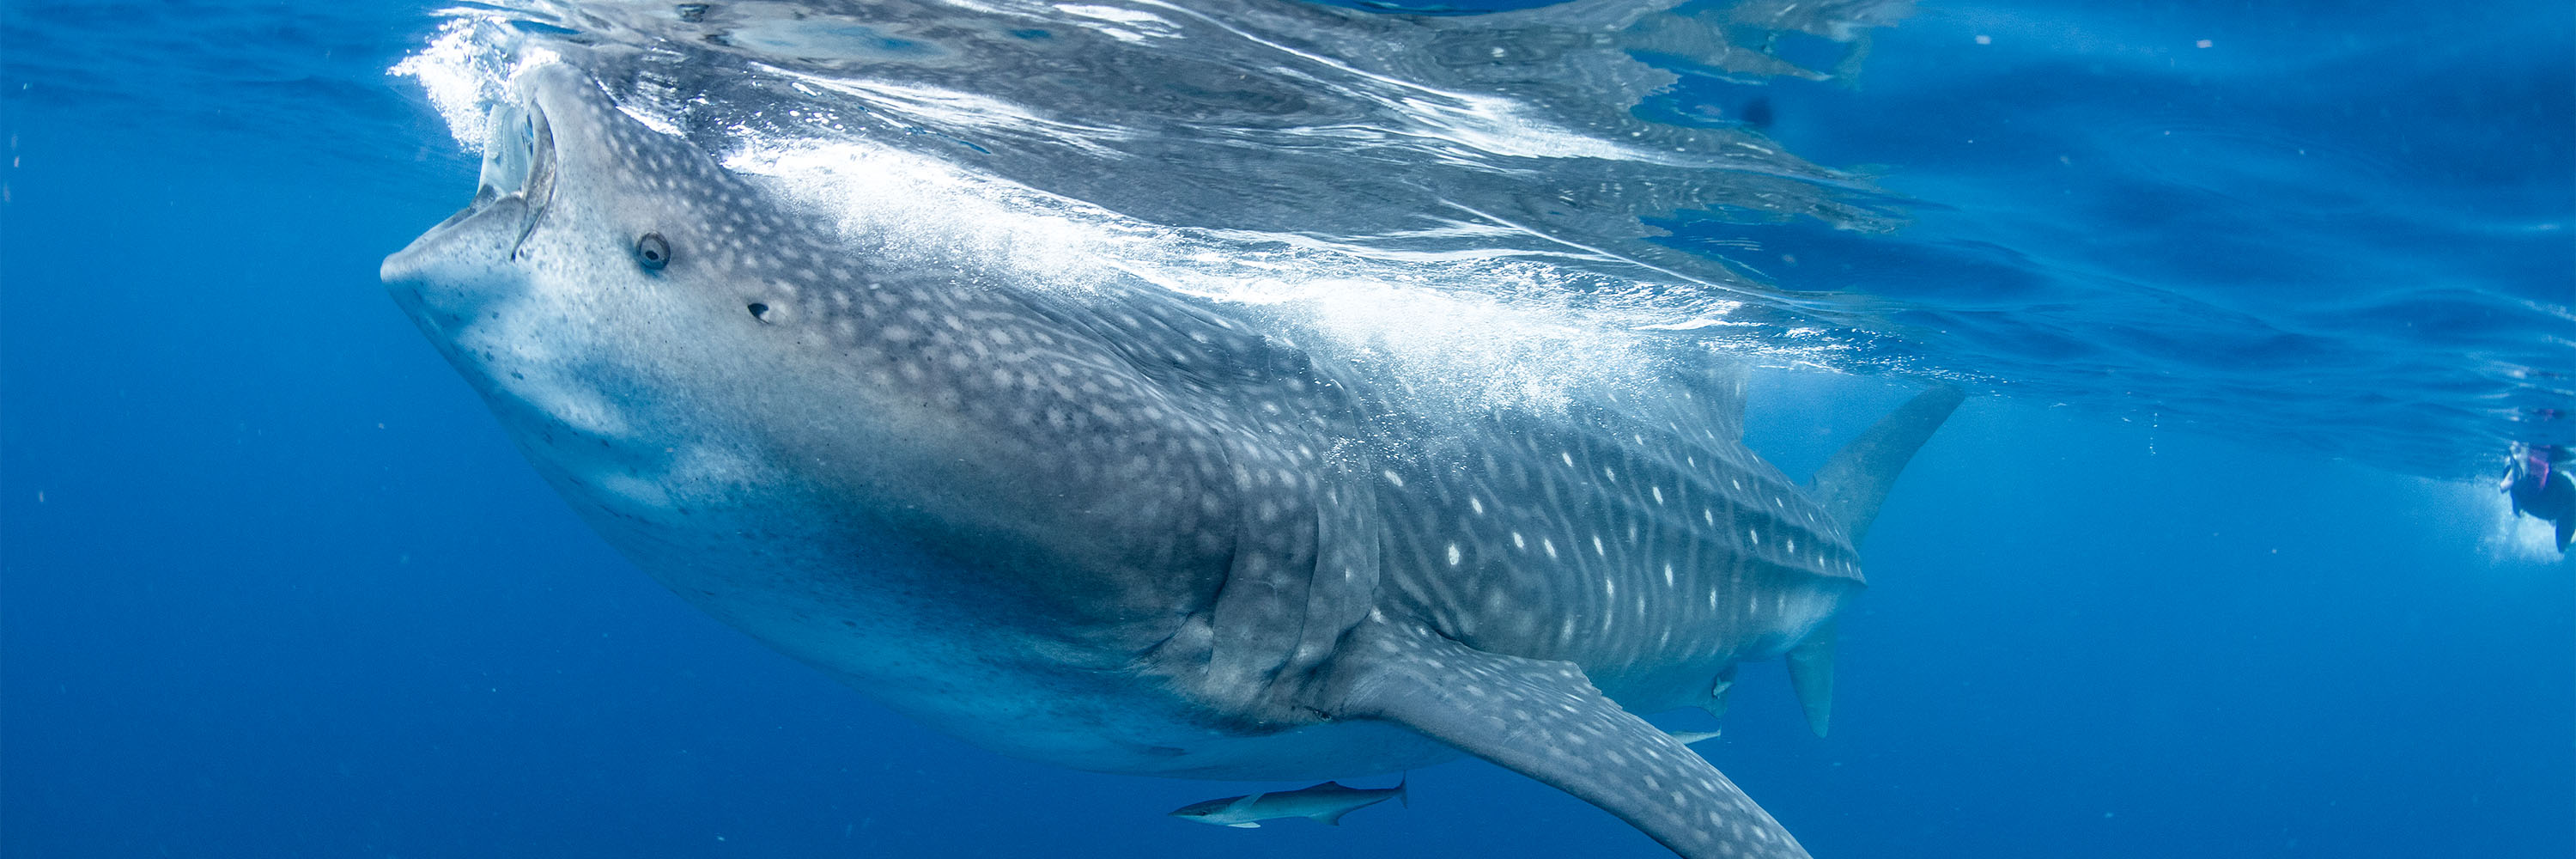 Whale Sharks Photography Workshop